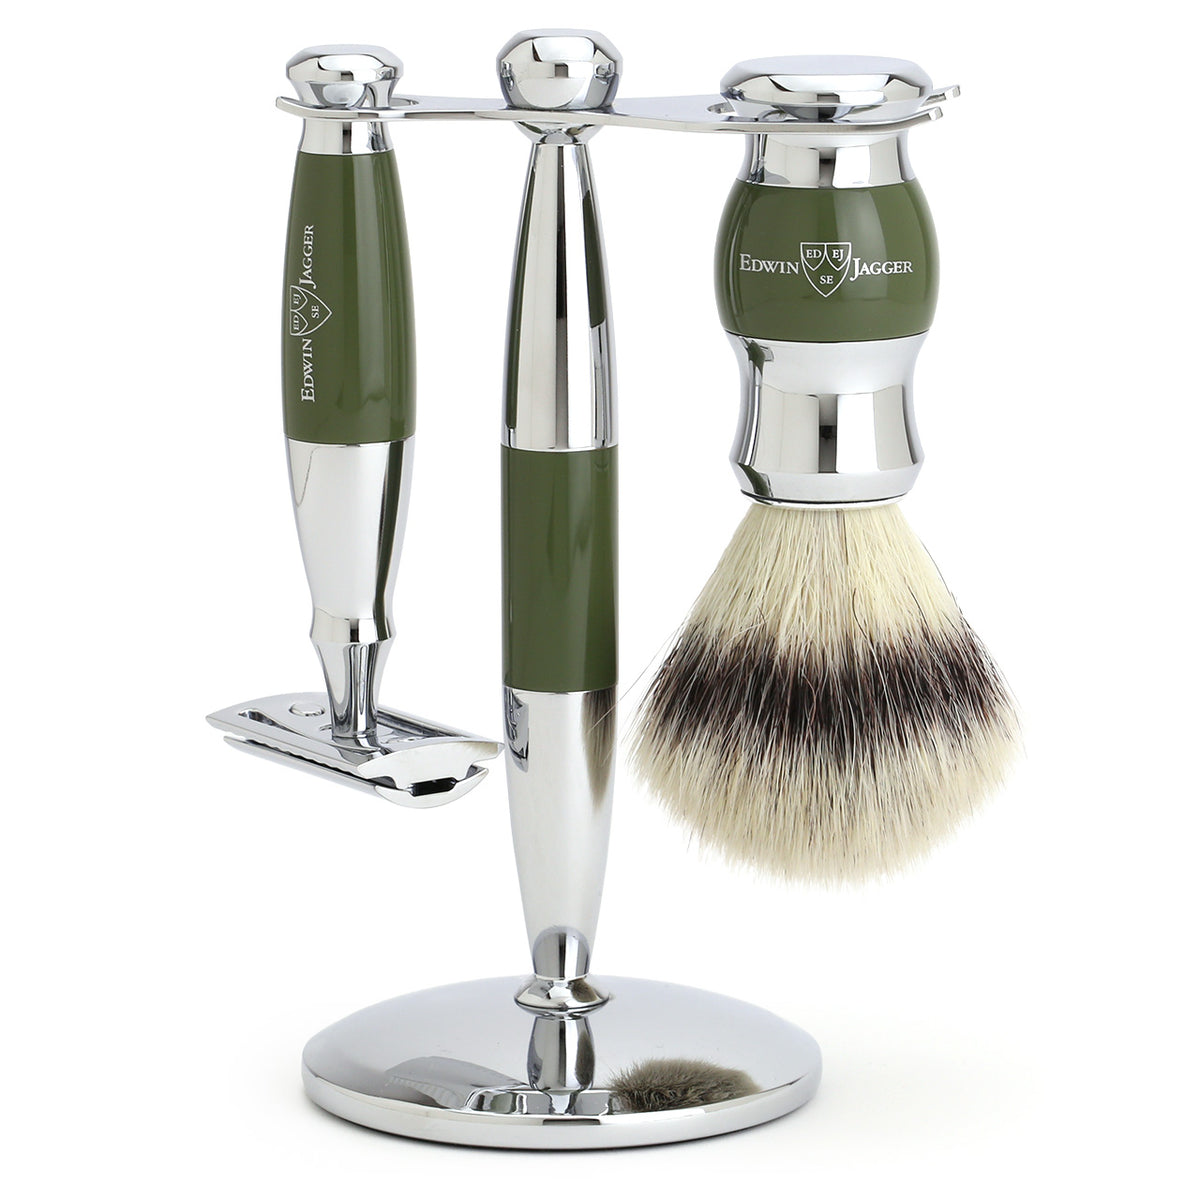 Edwin Jagger Shaving Set with Safety Razor, Shaving Brush and Stand - Olive Green